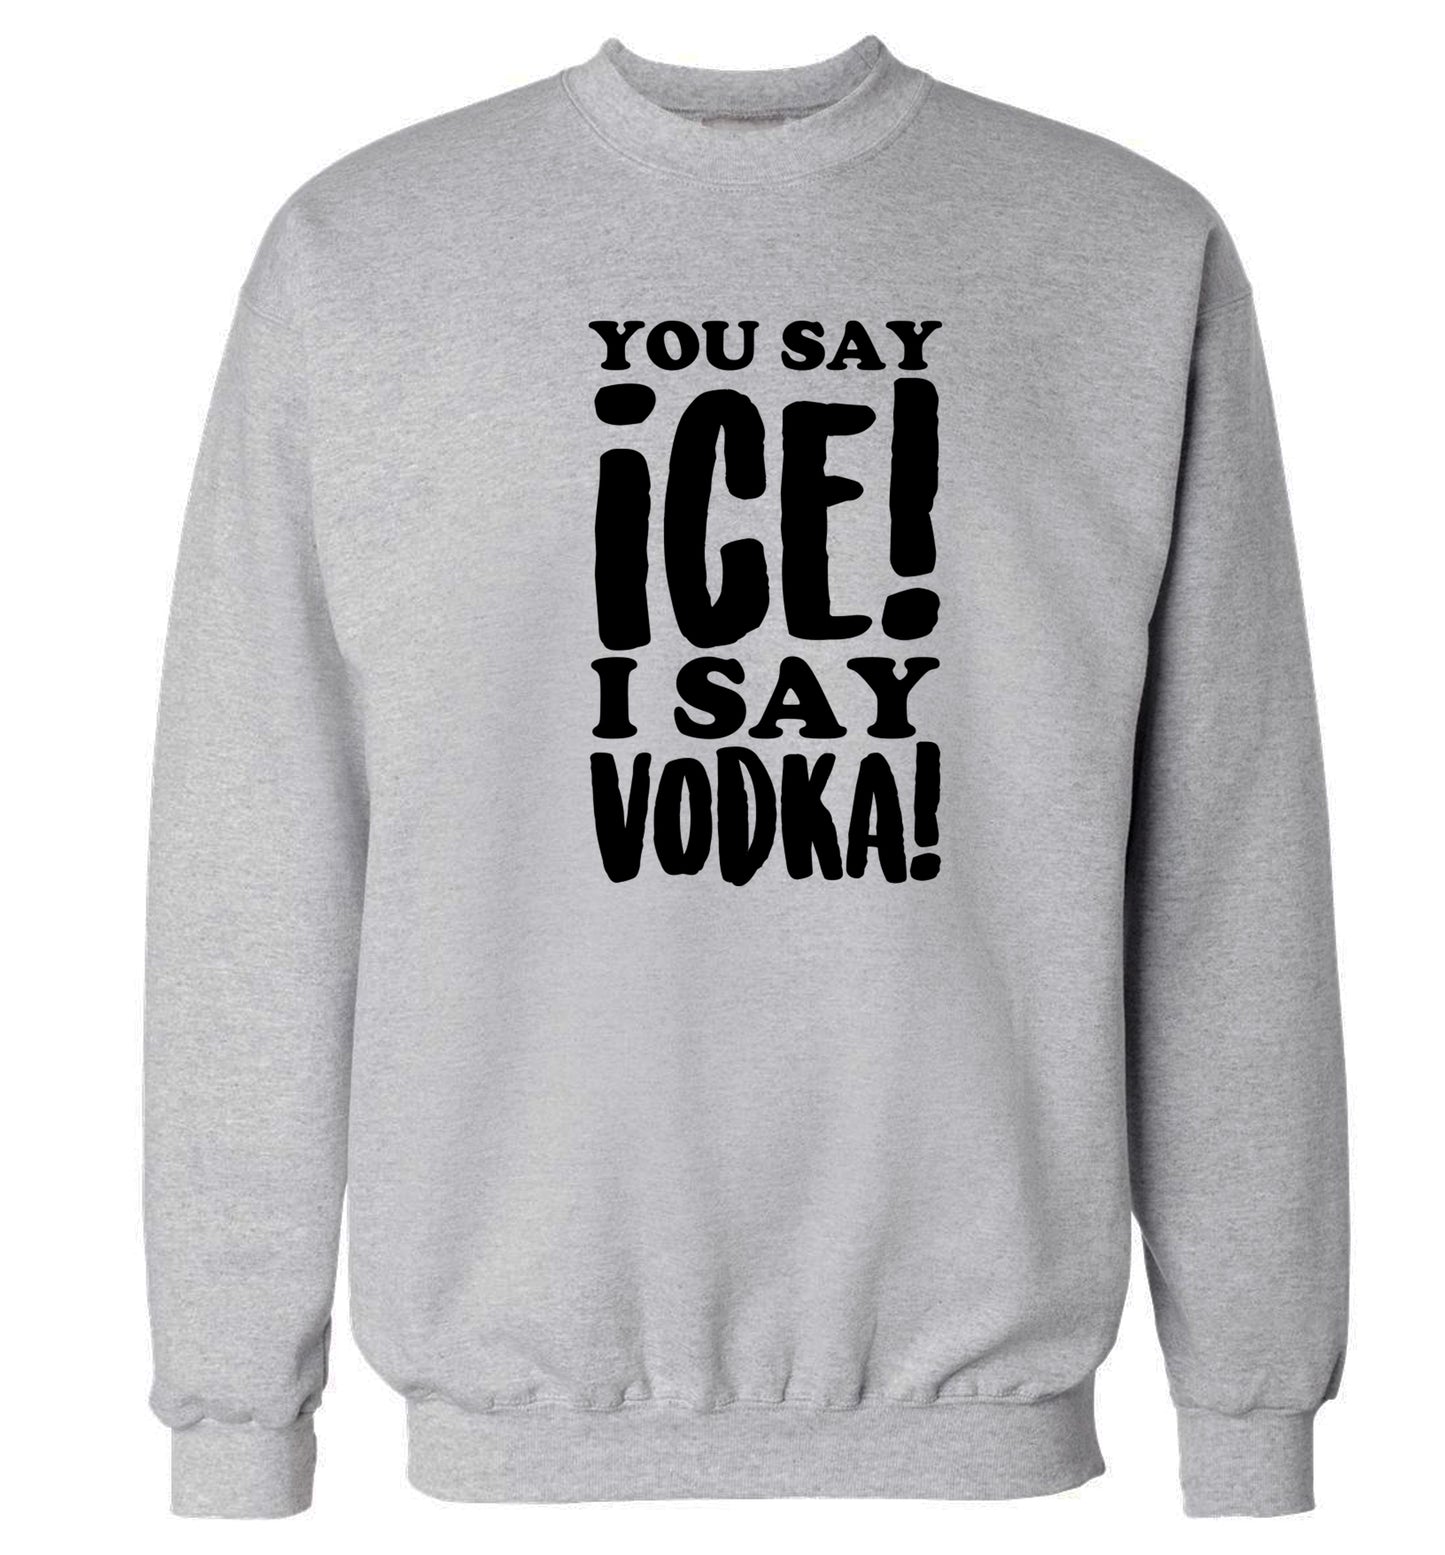 You say ice I say vodka! Adult's unisex grey Sweater 2XL